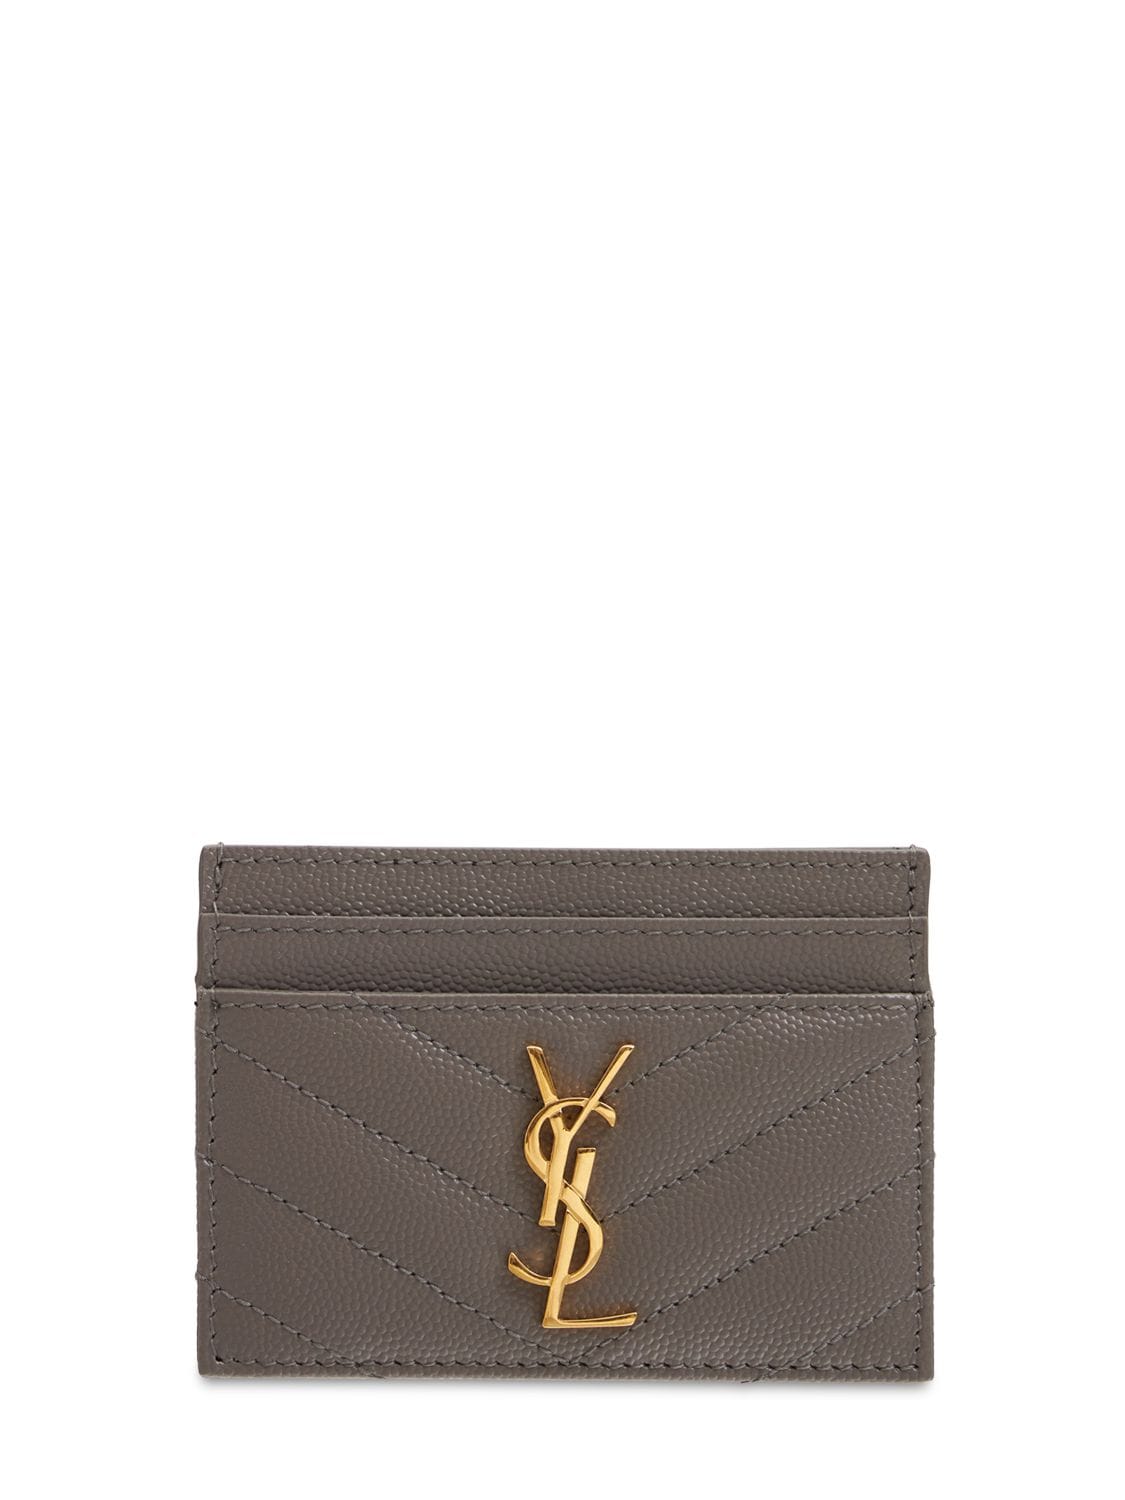 Ysl Credit Card Hold